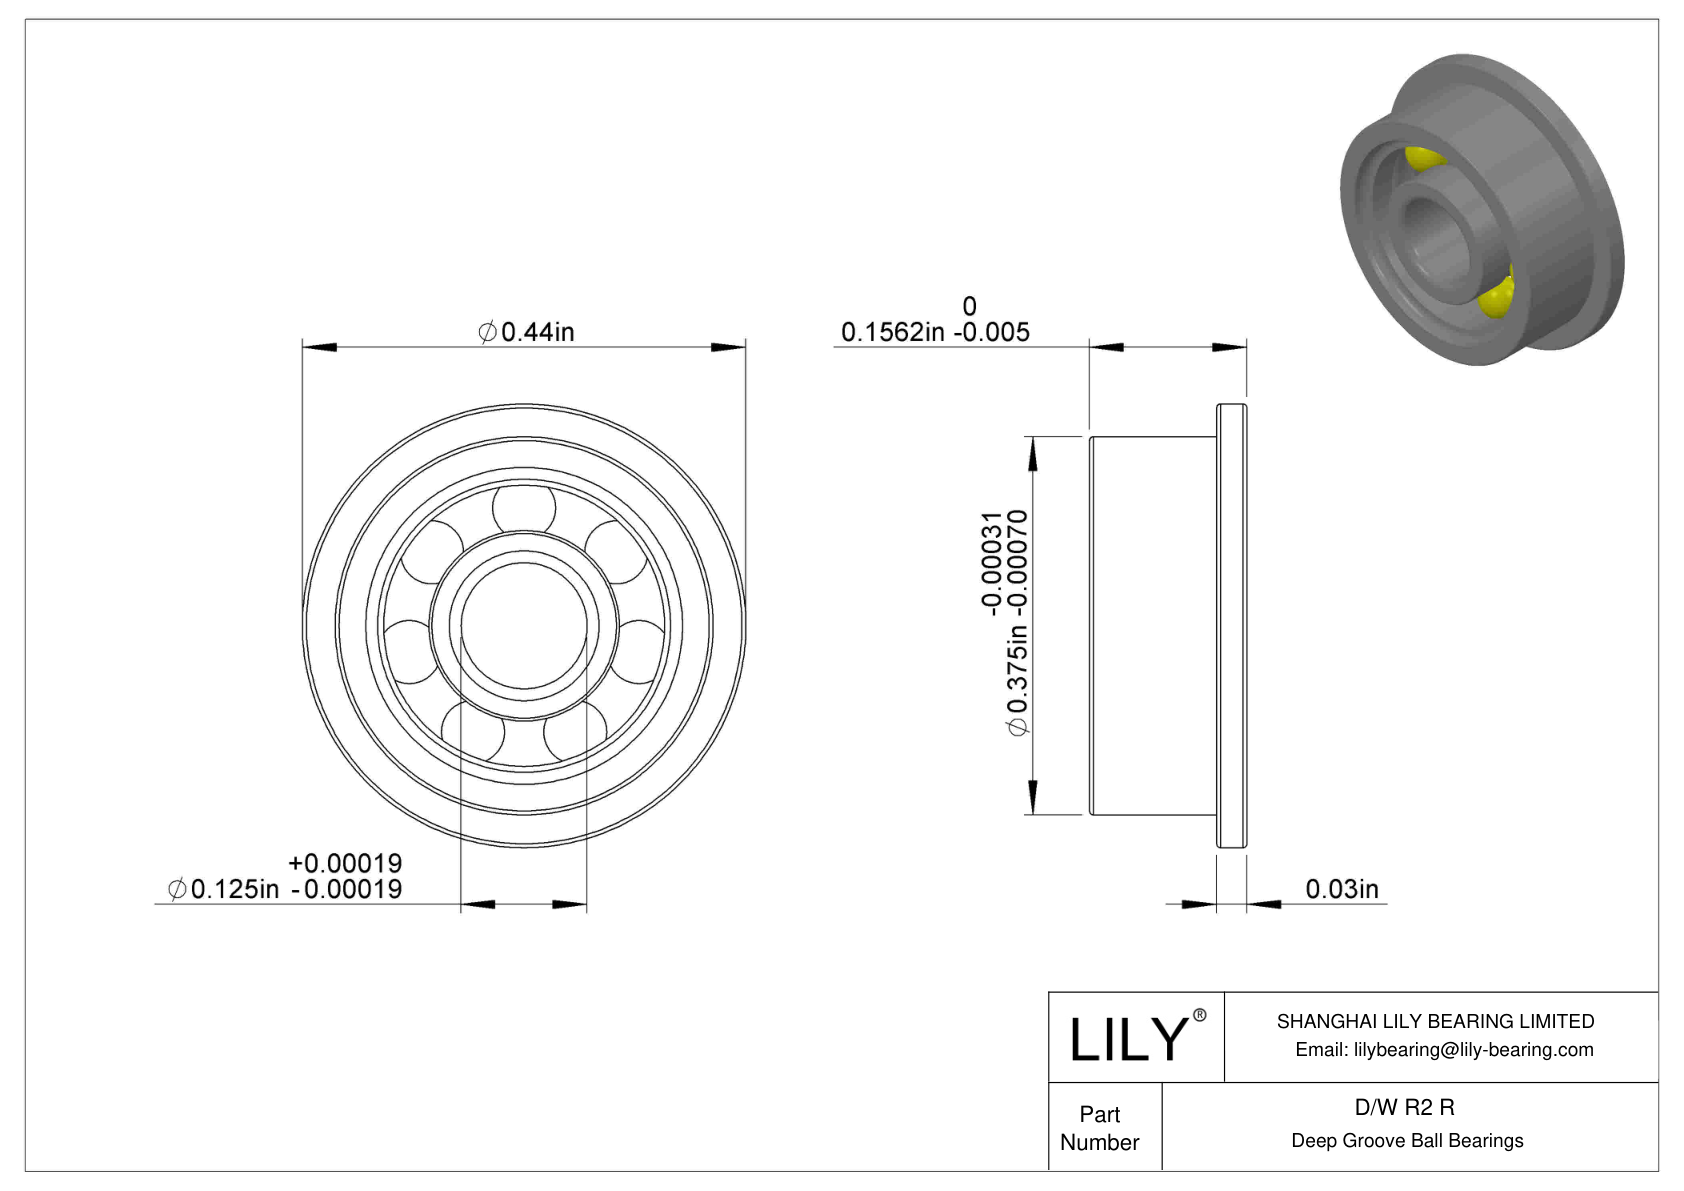 D/W R2 R Flanged Ball Bearings cad drawing